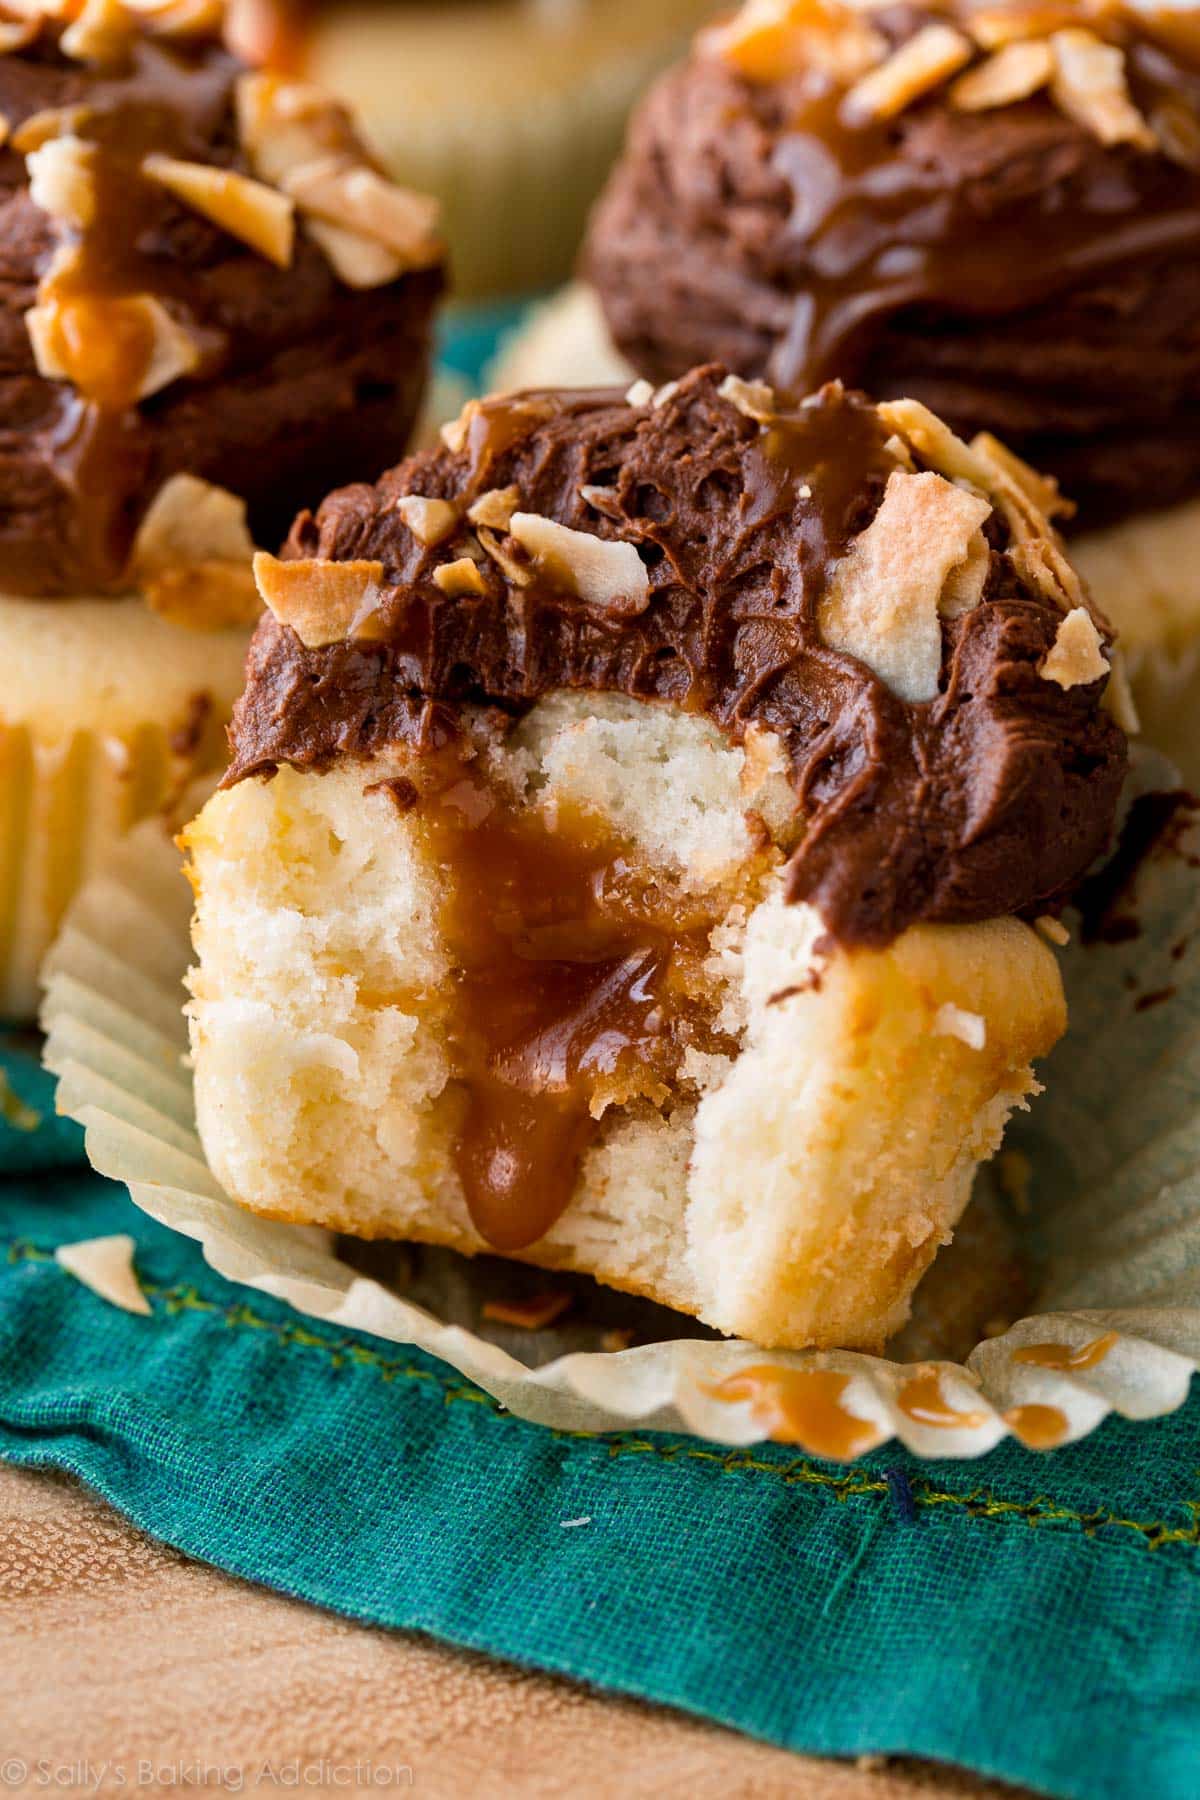 a bite out of a chocolate caramel coconut cupcake showing the caramel filling in the center